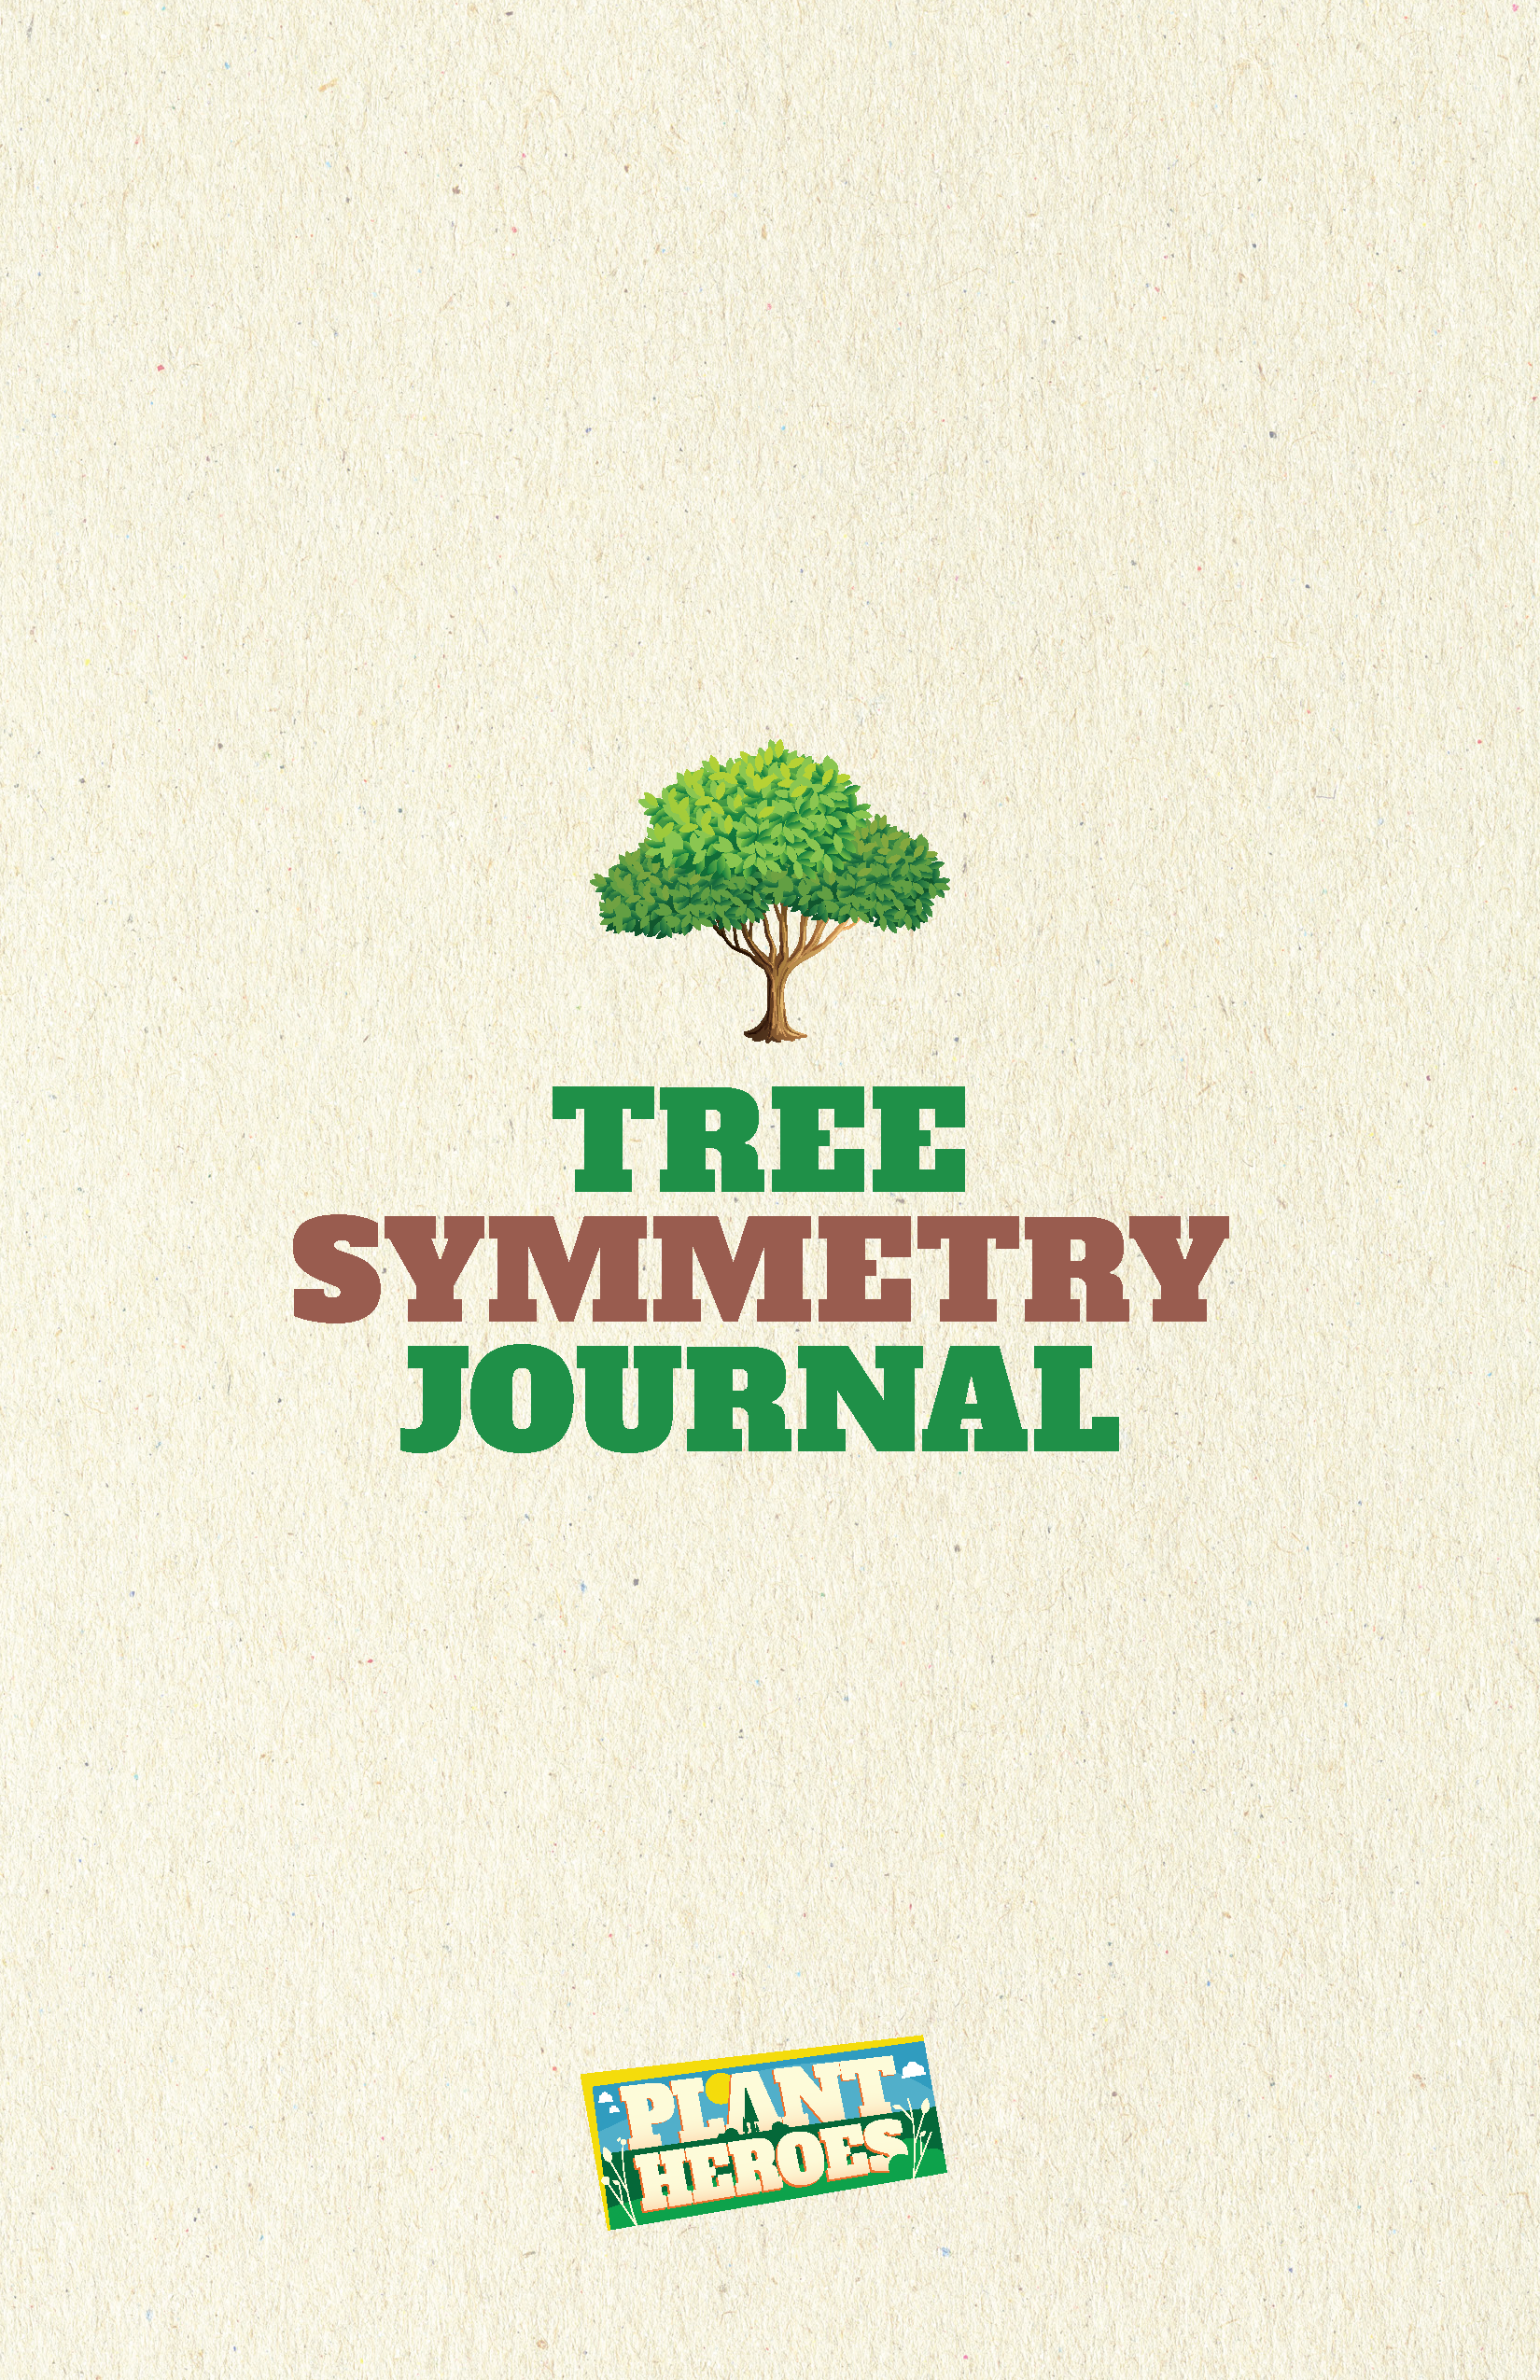 Cover image of the tree symmetry journal with a tree image on it